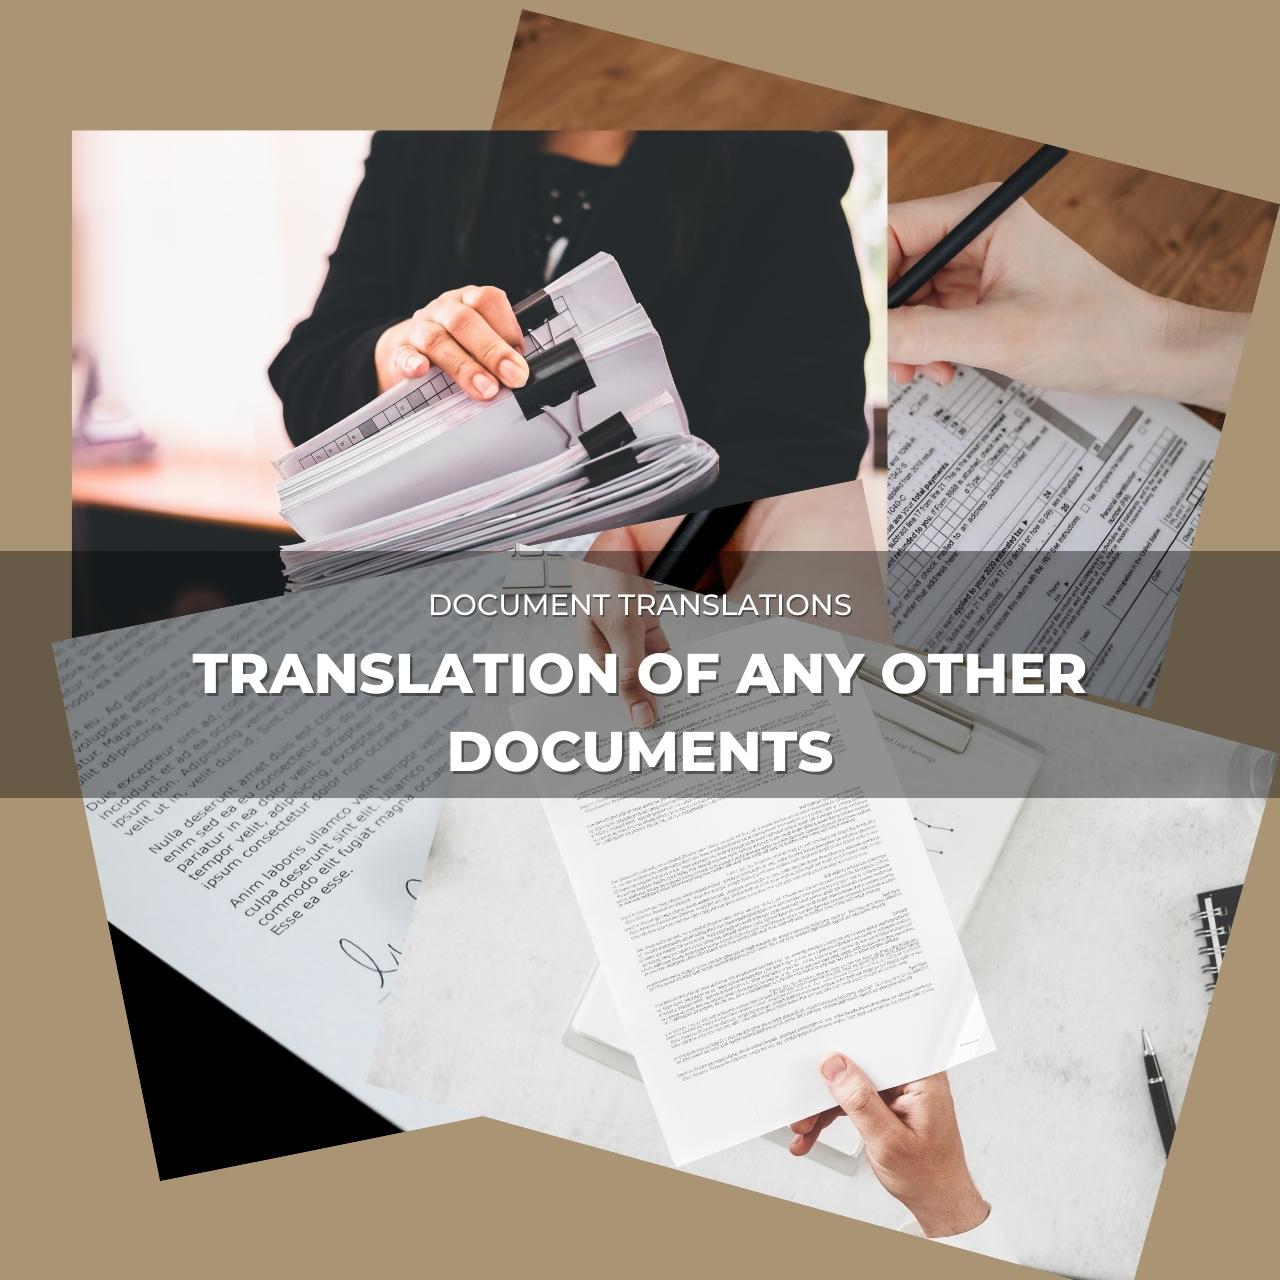 Translation of any other documents